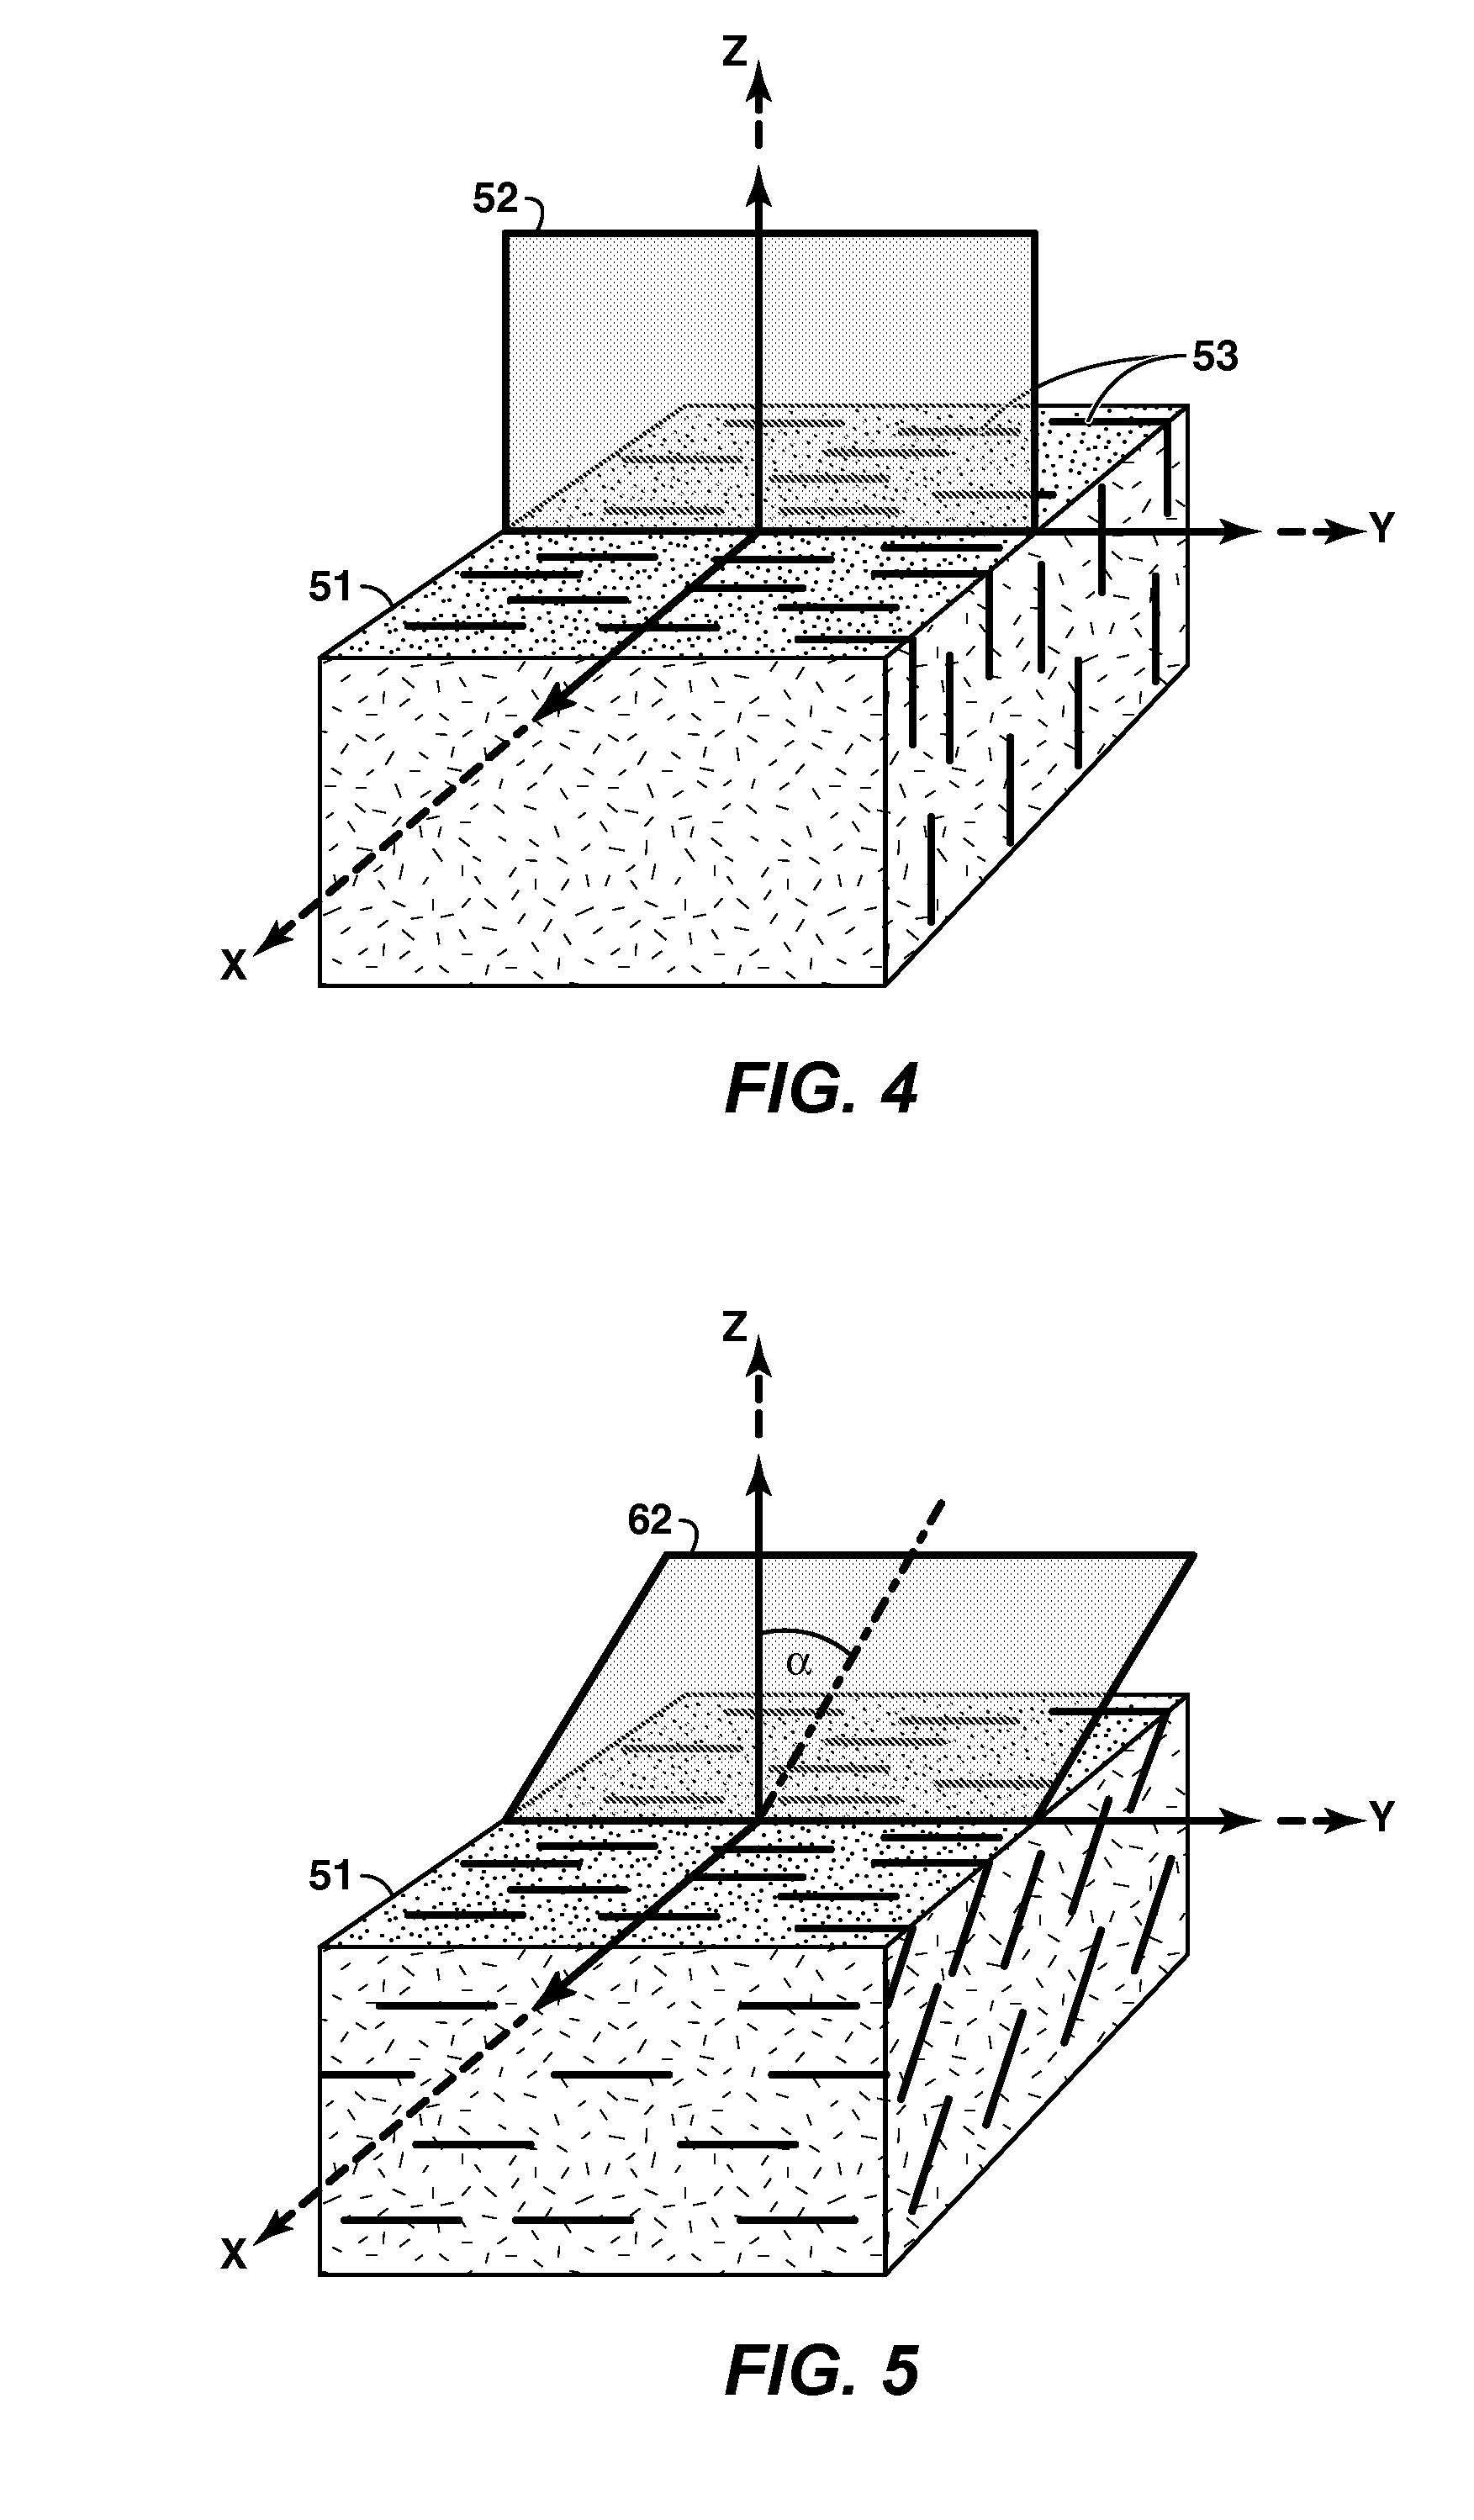 Method For Reservoir Fracture and Cross Beds Detection Using Tri-Axial/Multi-Component Resistivity Anisotropy Measurements